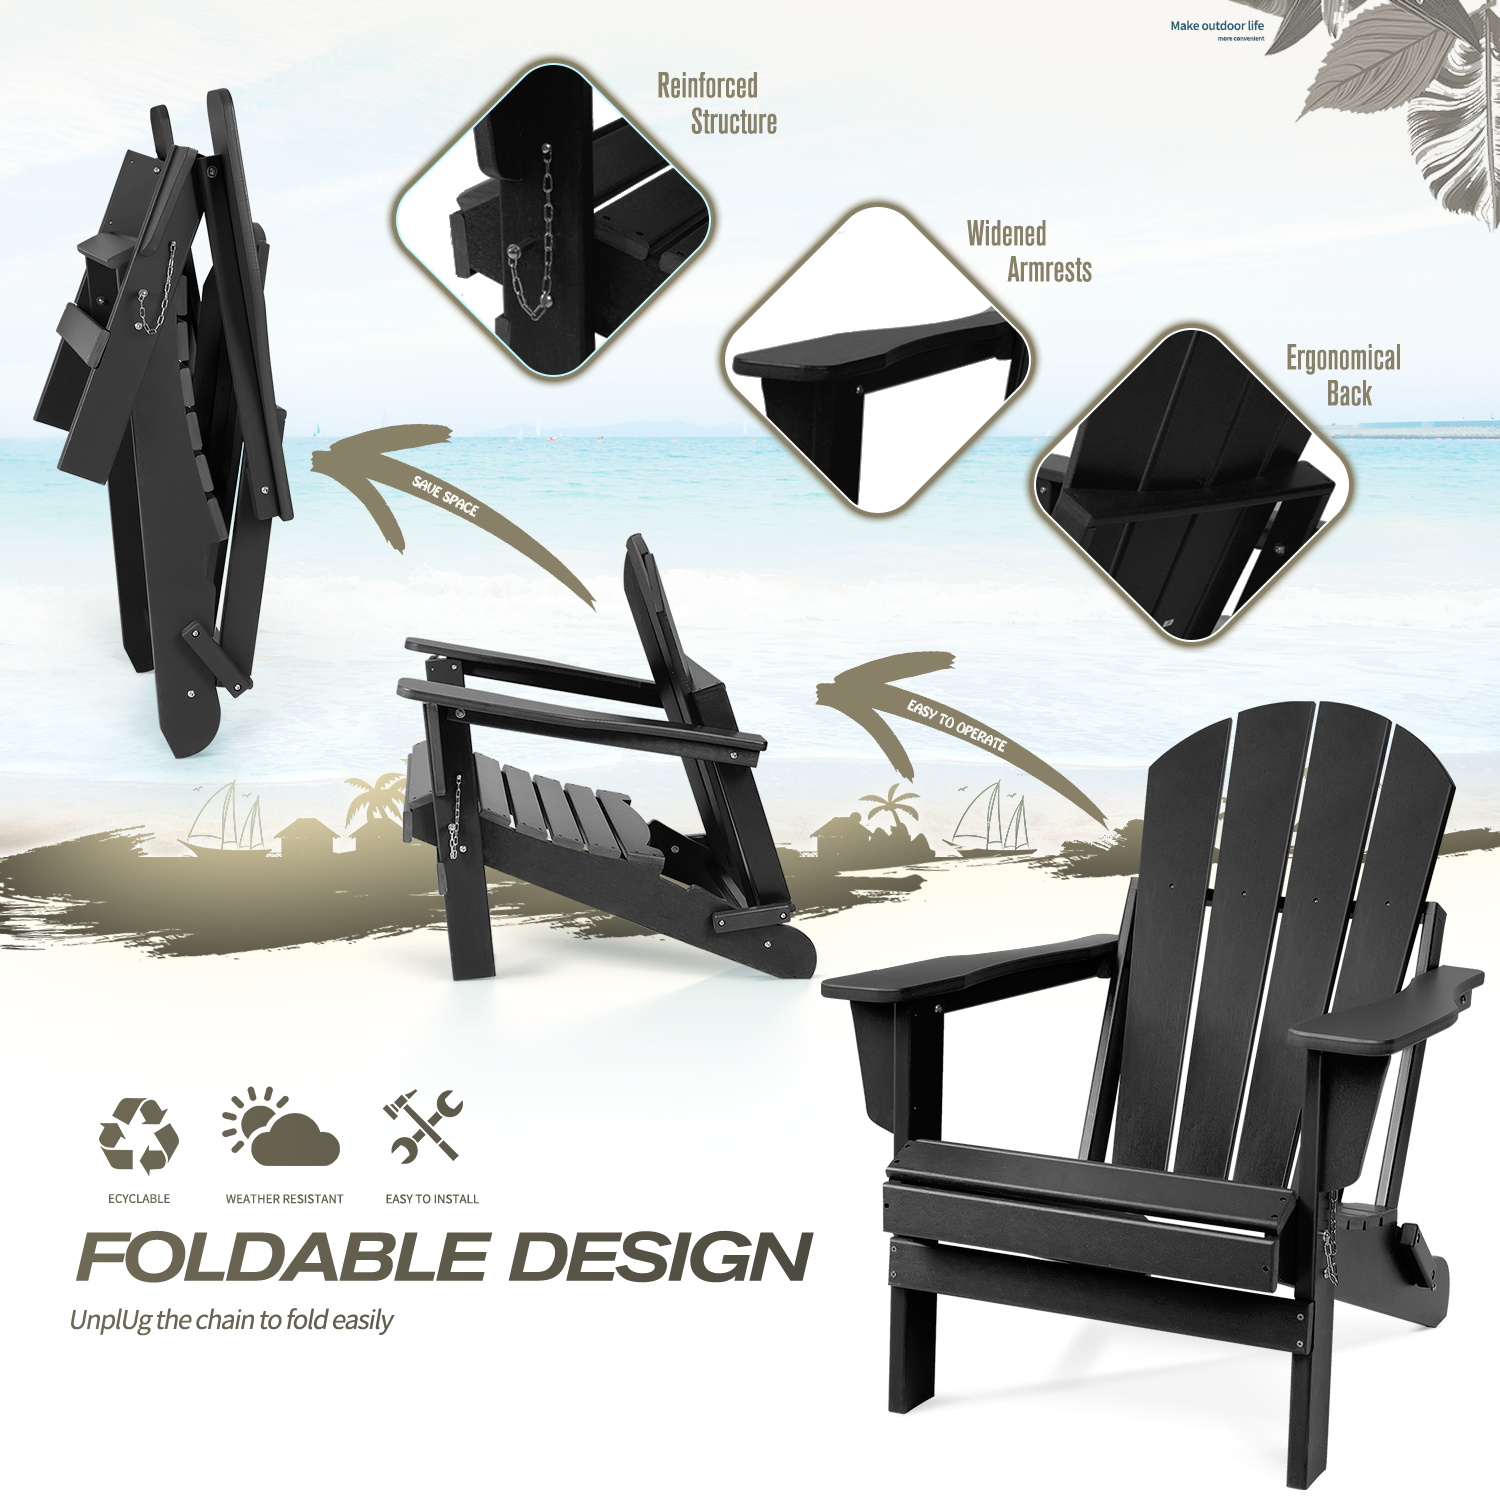 Lacoo Folding Adirondack Chair All Weather Resistant Resin Outdoor Patio Chair, Black - image 5 of 7